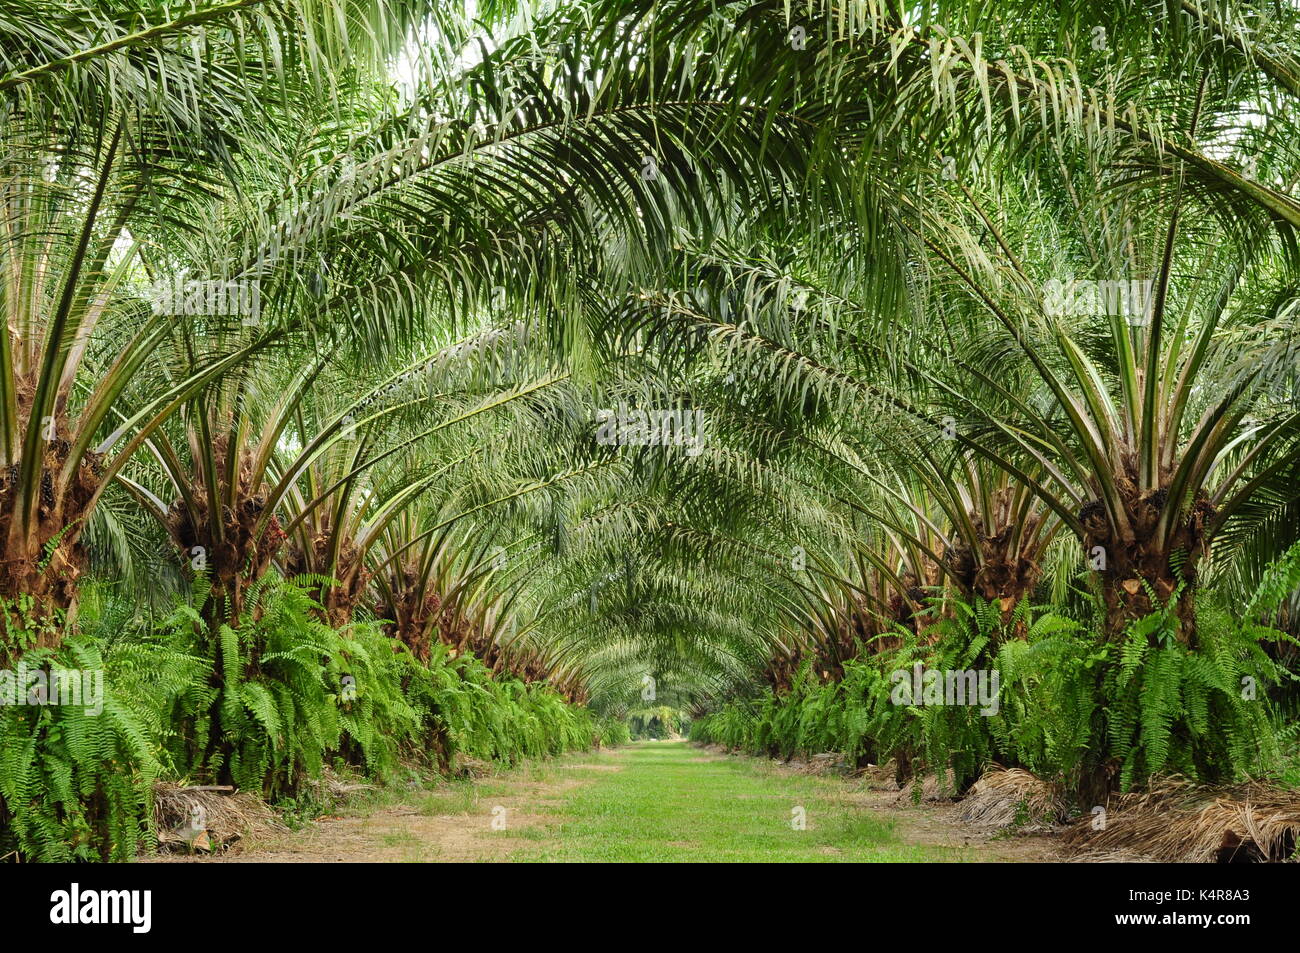 beautiful of unmatured oil palm tree in a field Stock Photo